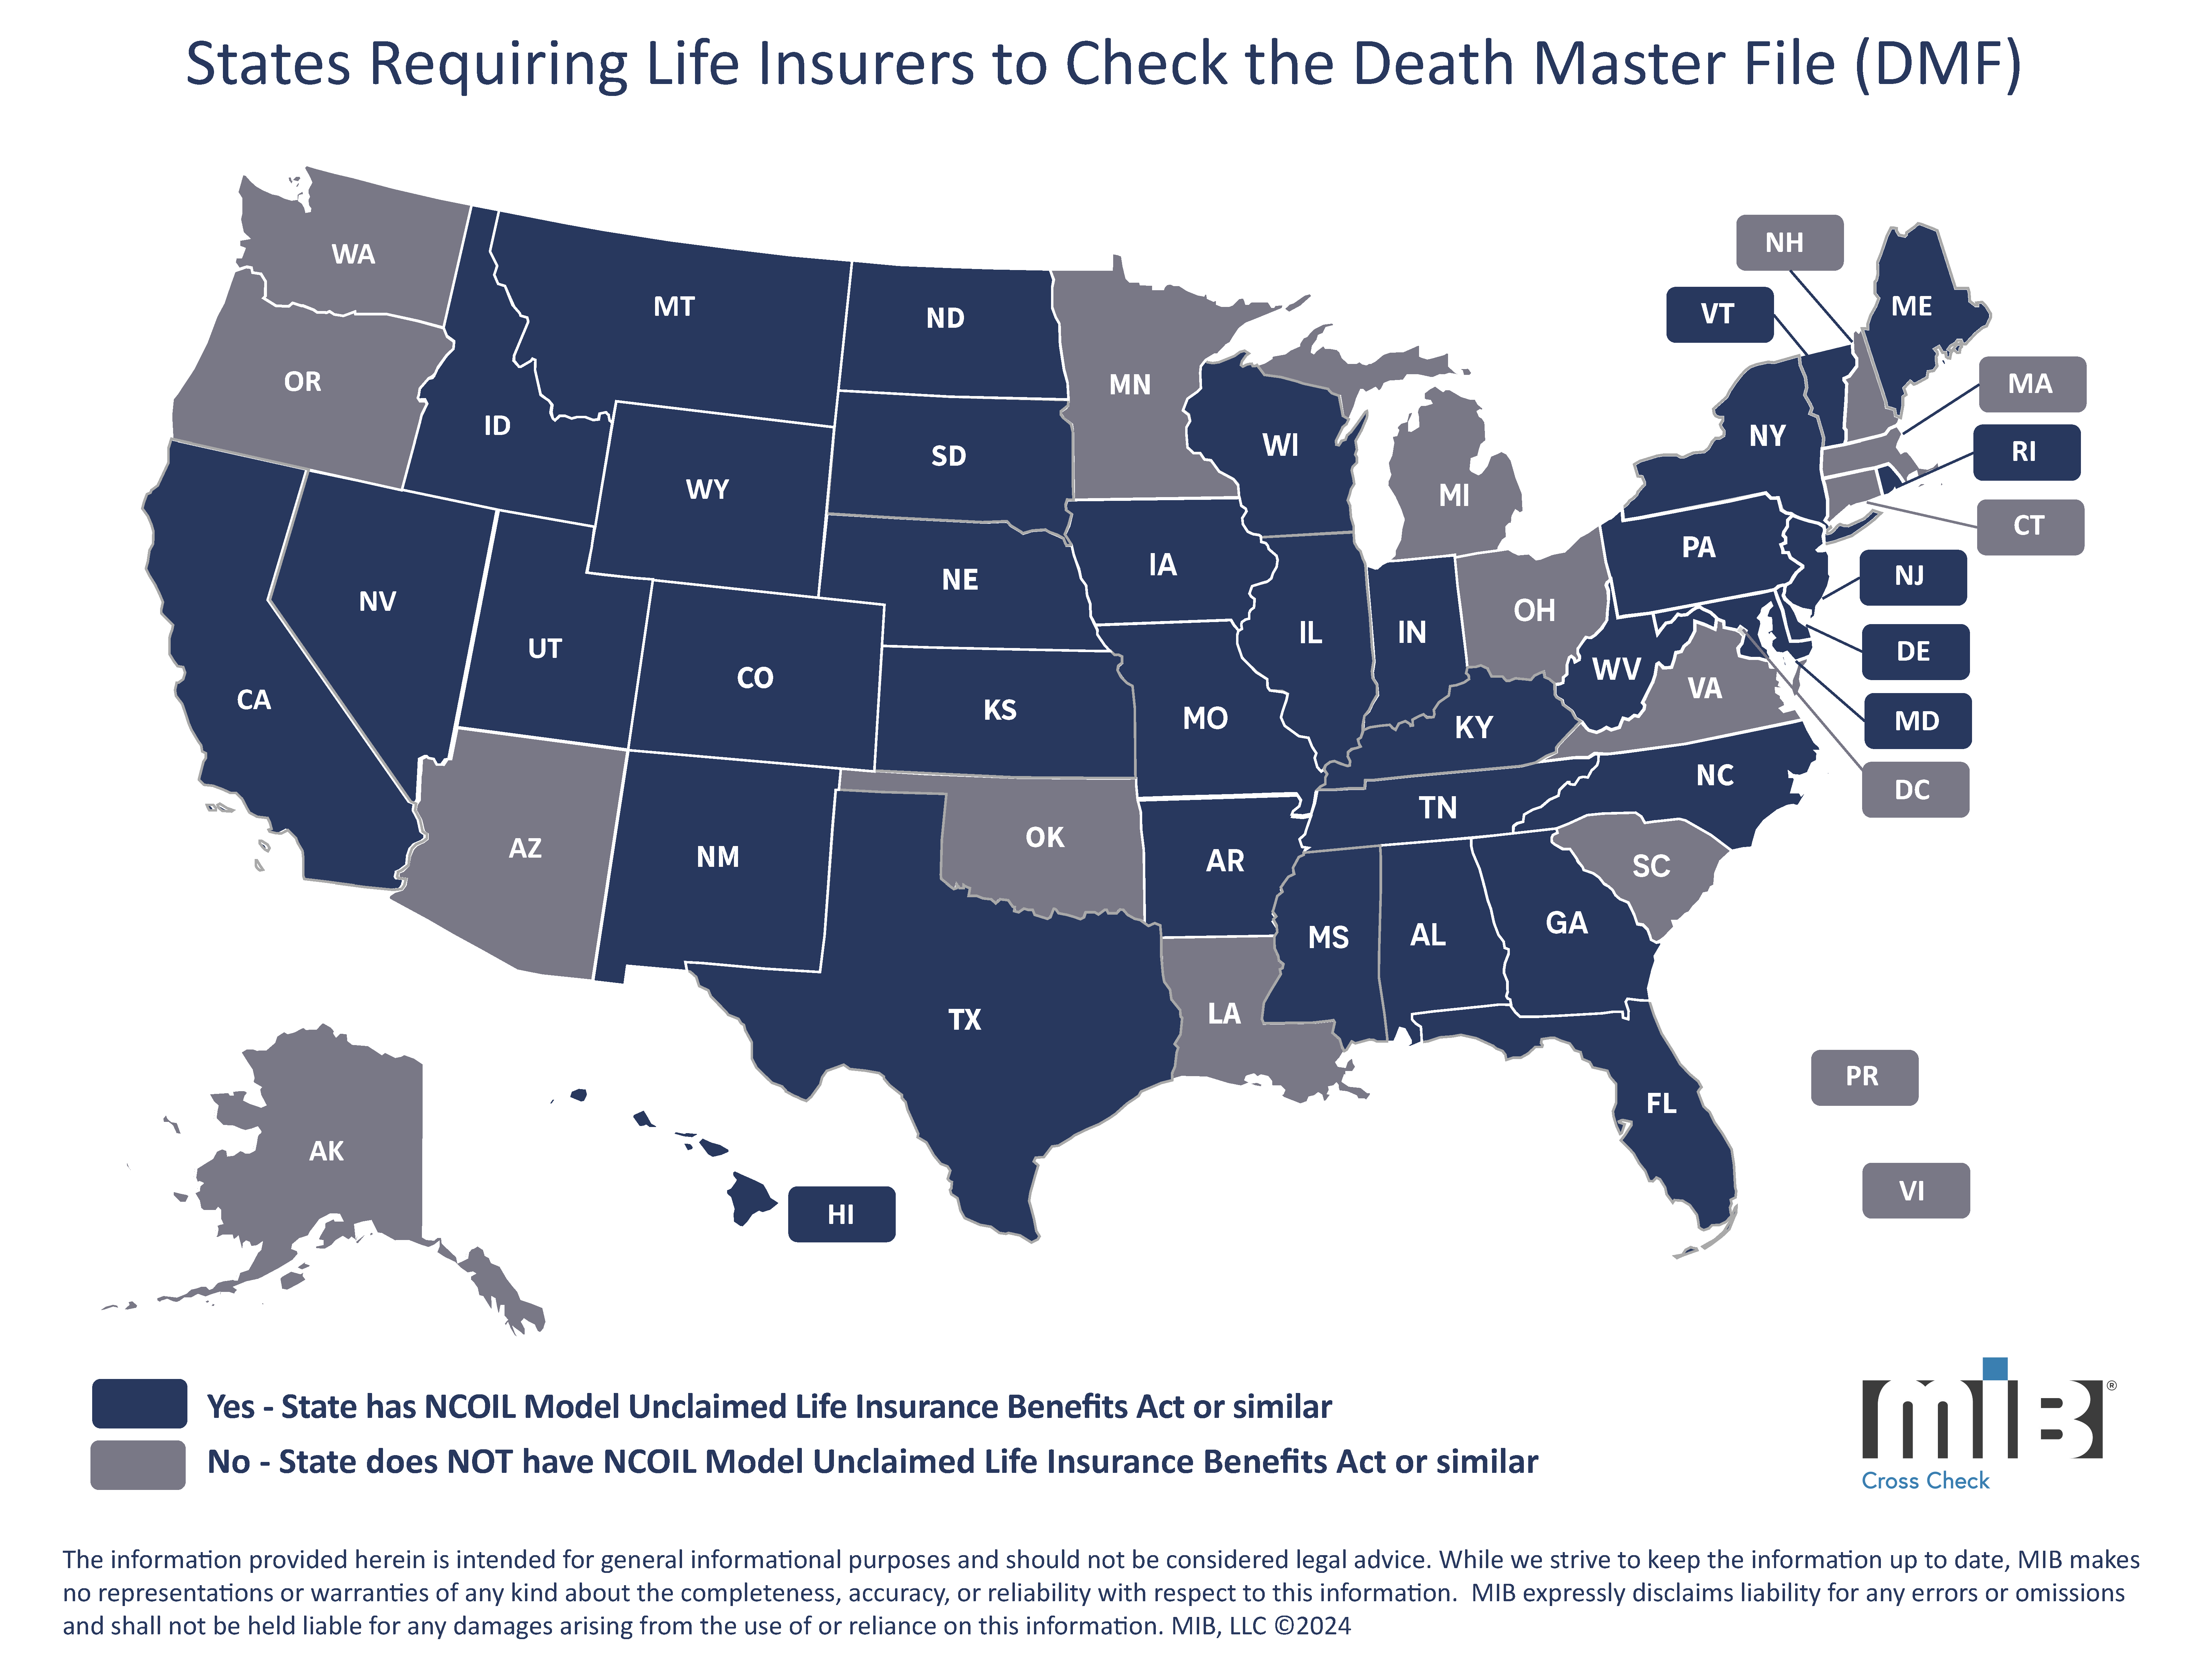 States Requiring Life Insurers to Check the Death Master File